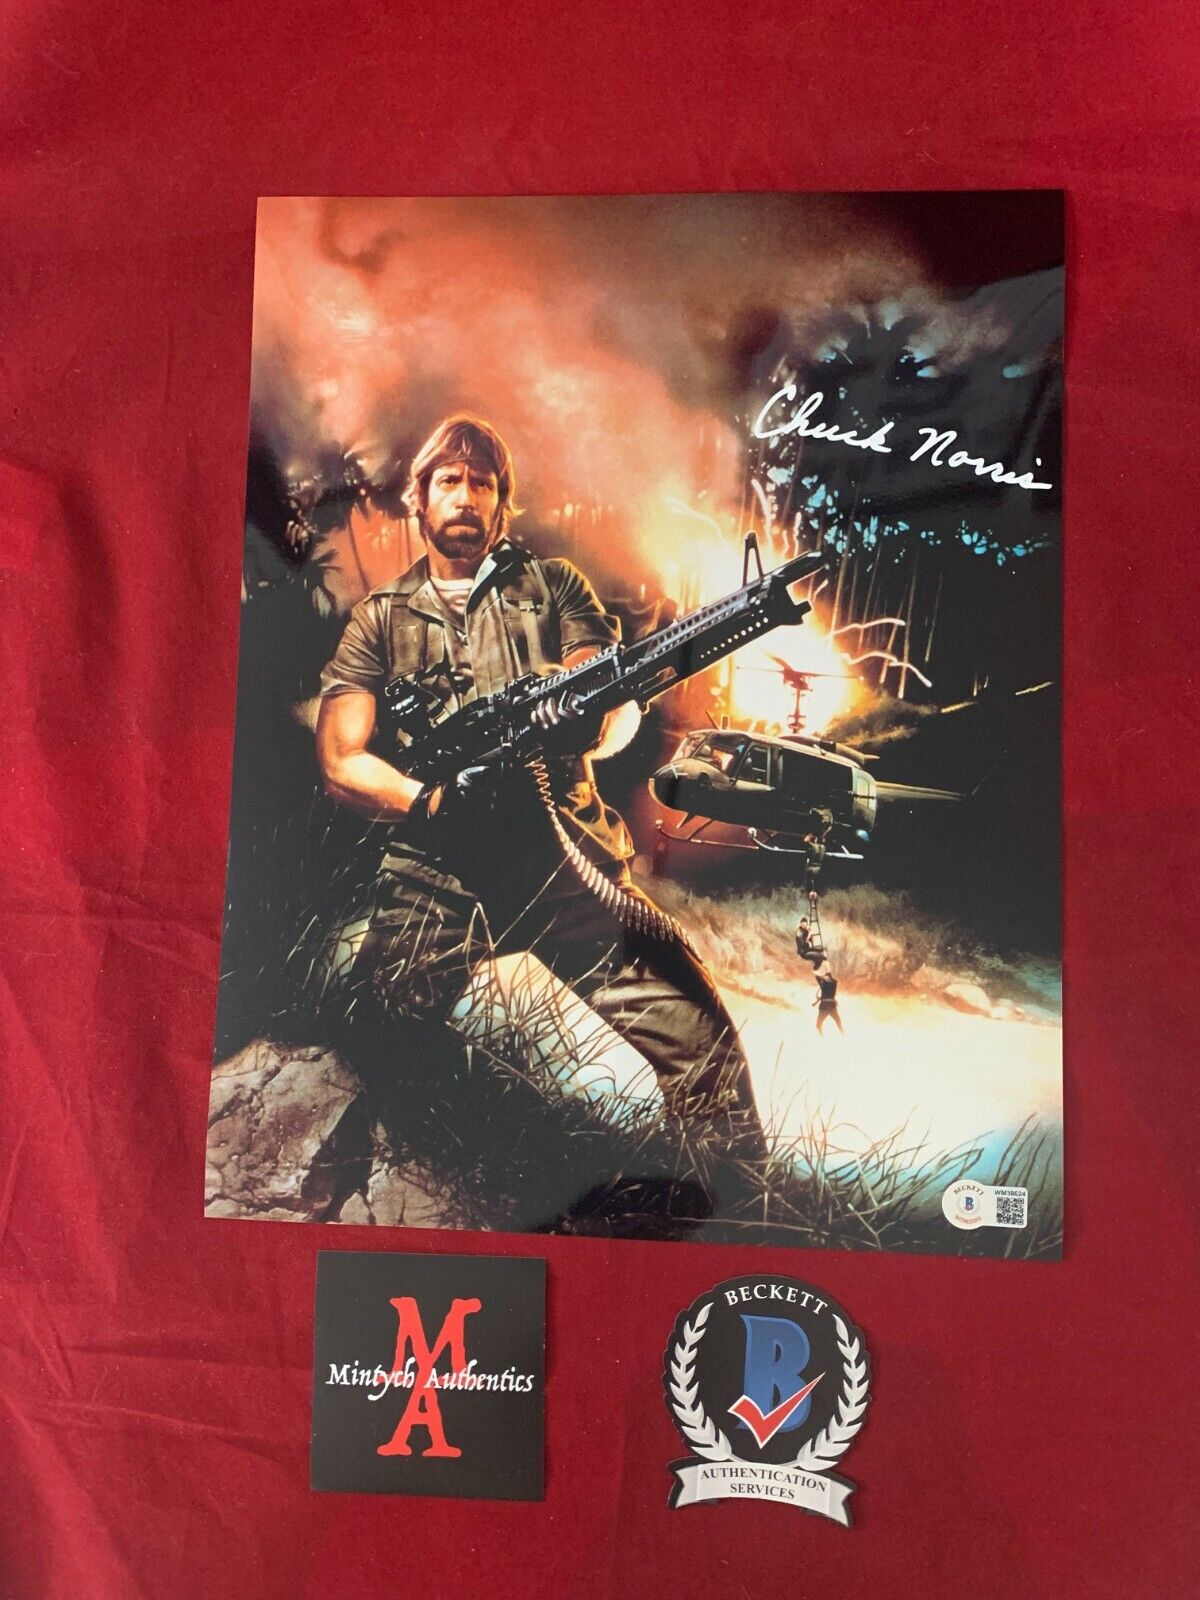 CHUCK NORRIS AUTOGRAPHED SIGNED 11x14 Photo Poster painting! MISSING IN ACTION! BECKETT COA!